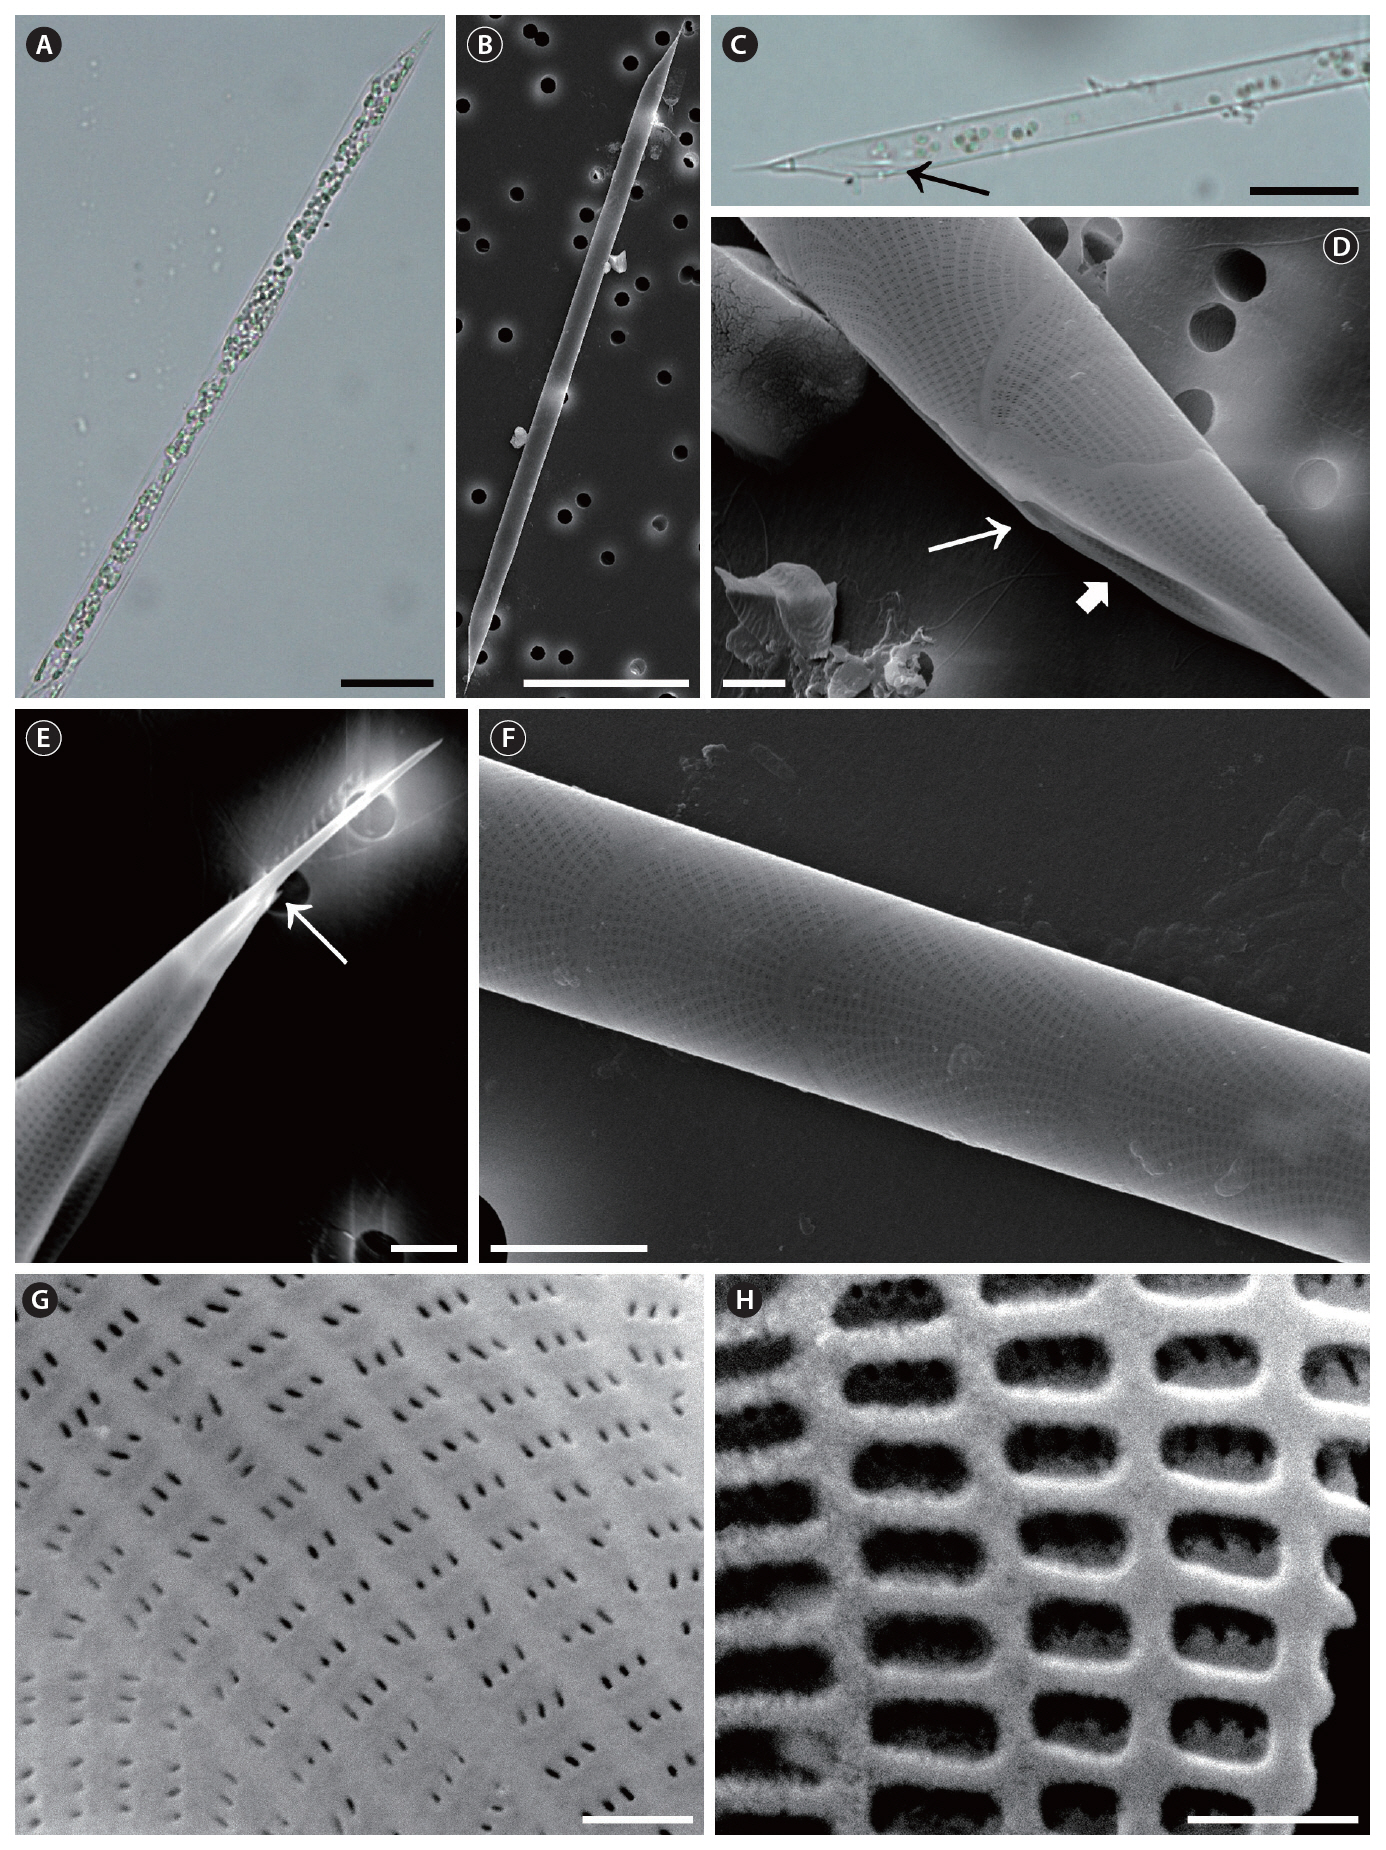 Rhizosolenia fallax. (A) A complete cell light microscopy (LM). (B) A complete cell scanning electron microscopy (SEM). (C) Apical part of valve showing the noticeable contiguous area (arrow) LM. (D) Clasper (thin arrow) and contiguous area (thick arrow) SEM. (E) Apical part of valve detail of otaria (arrow) SEM. (F) Girdle segments with striations straight in central area and curved in marginal area SEM. (G) Detail of velum structure external view SEM. (H) Detail of velum structure internal view SEM. Scale bars represent: A 20 ㎛; B 50 ㎛; C 10 ㎛; D & E 2 ㎛; F 5 ㎛; G & H 0.5 ㎛.